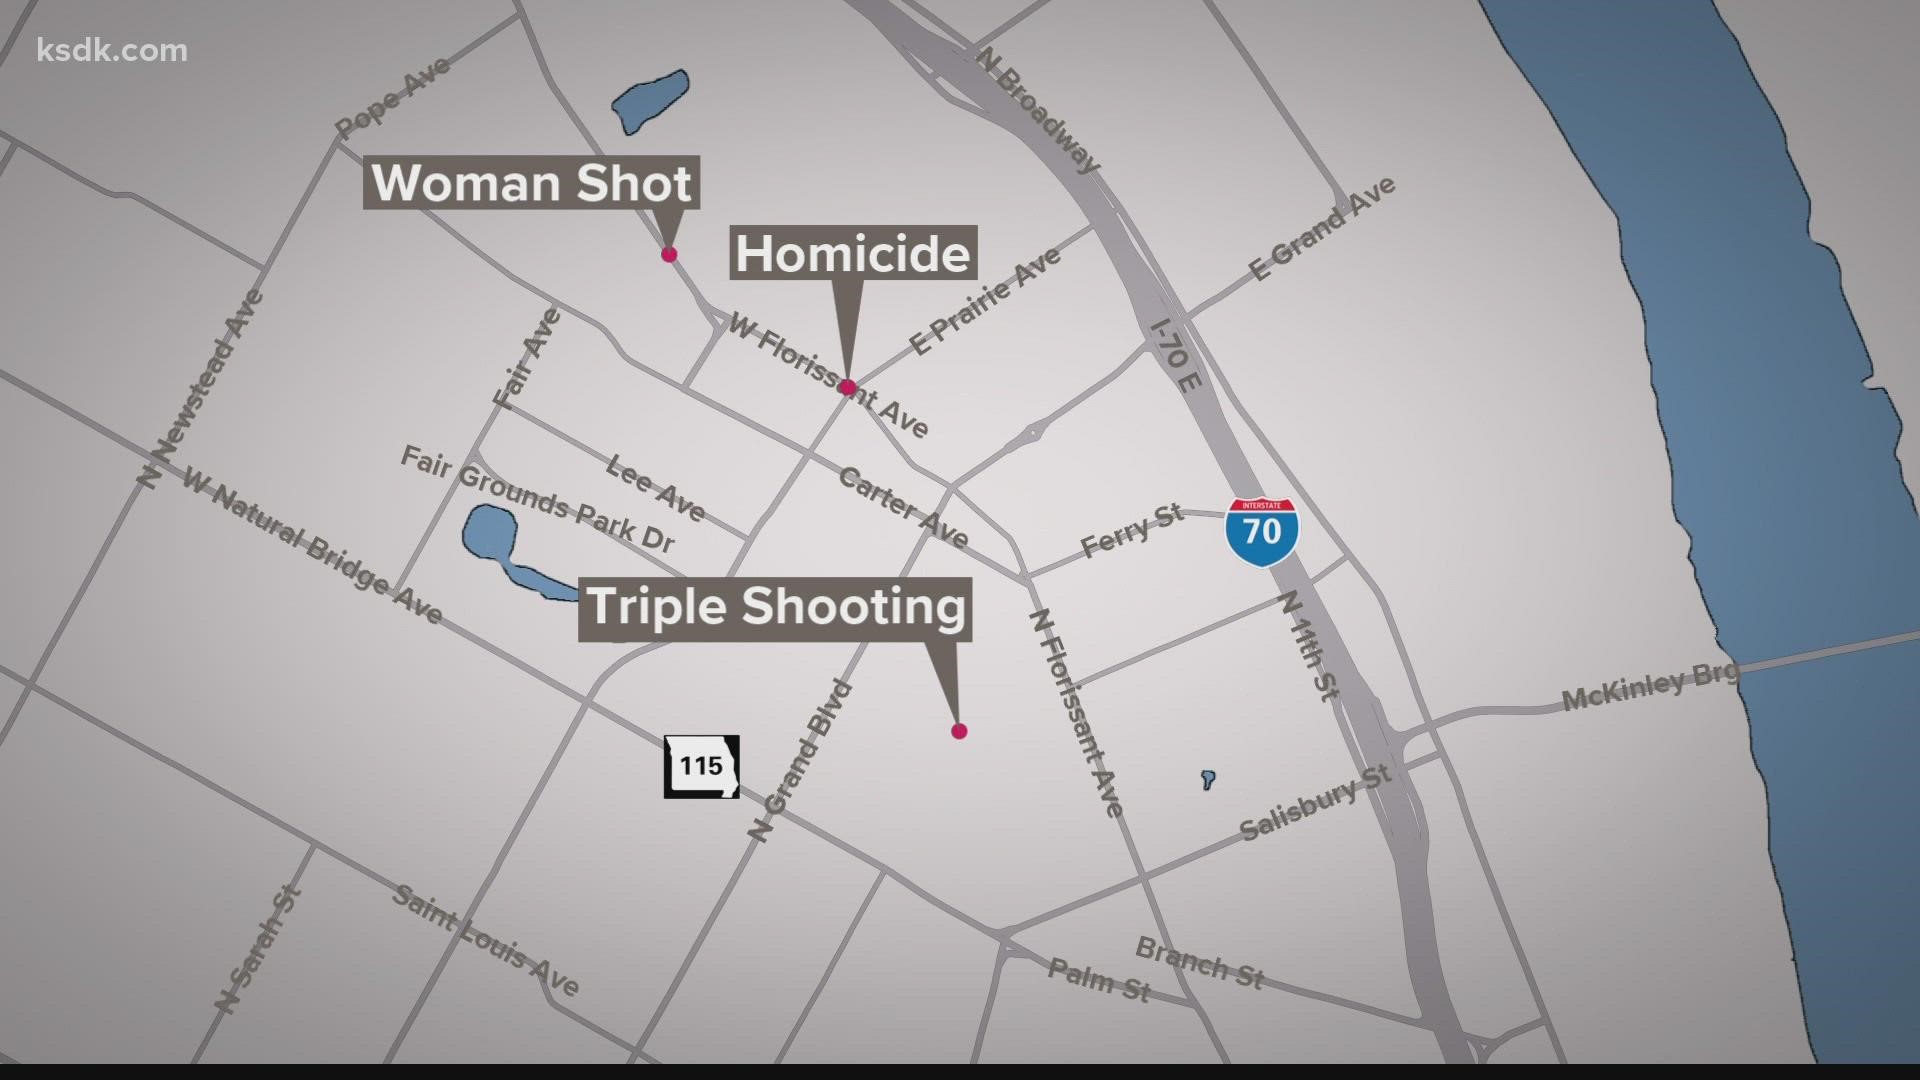 Two of the women were killed in a triple shooting in an abandoned apartment building.